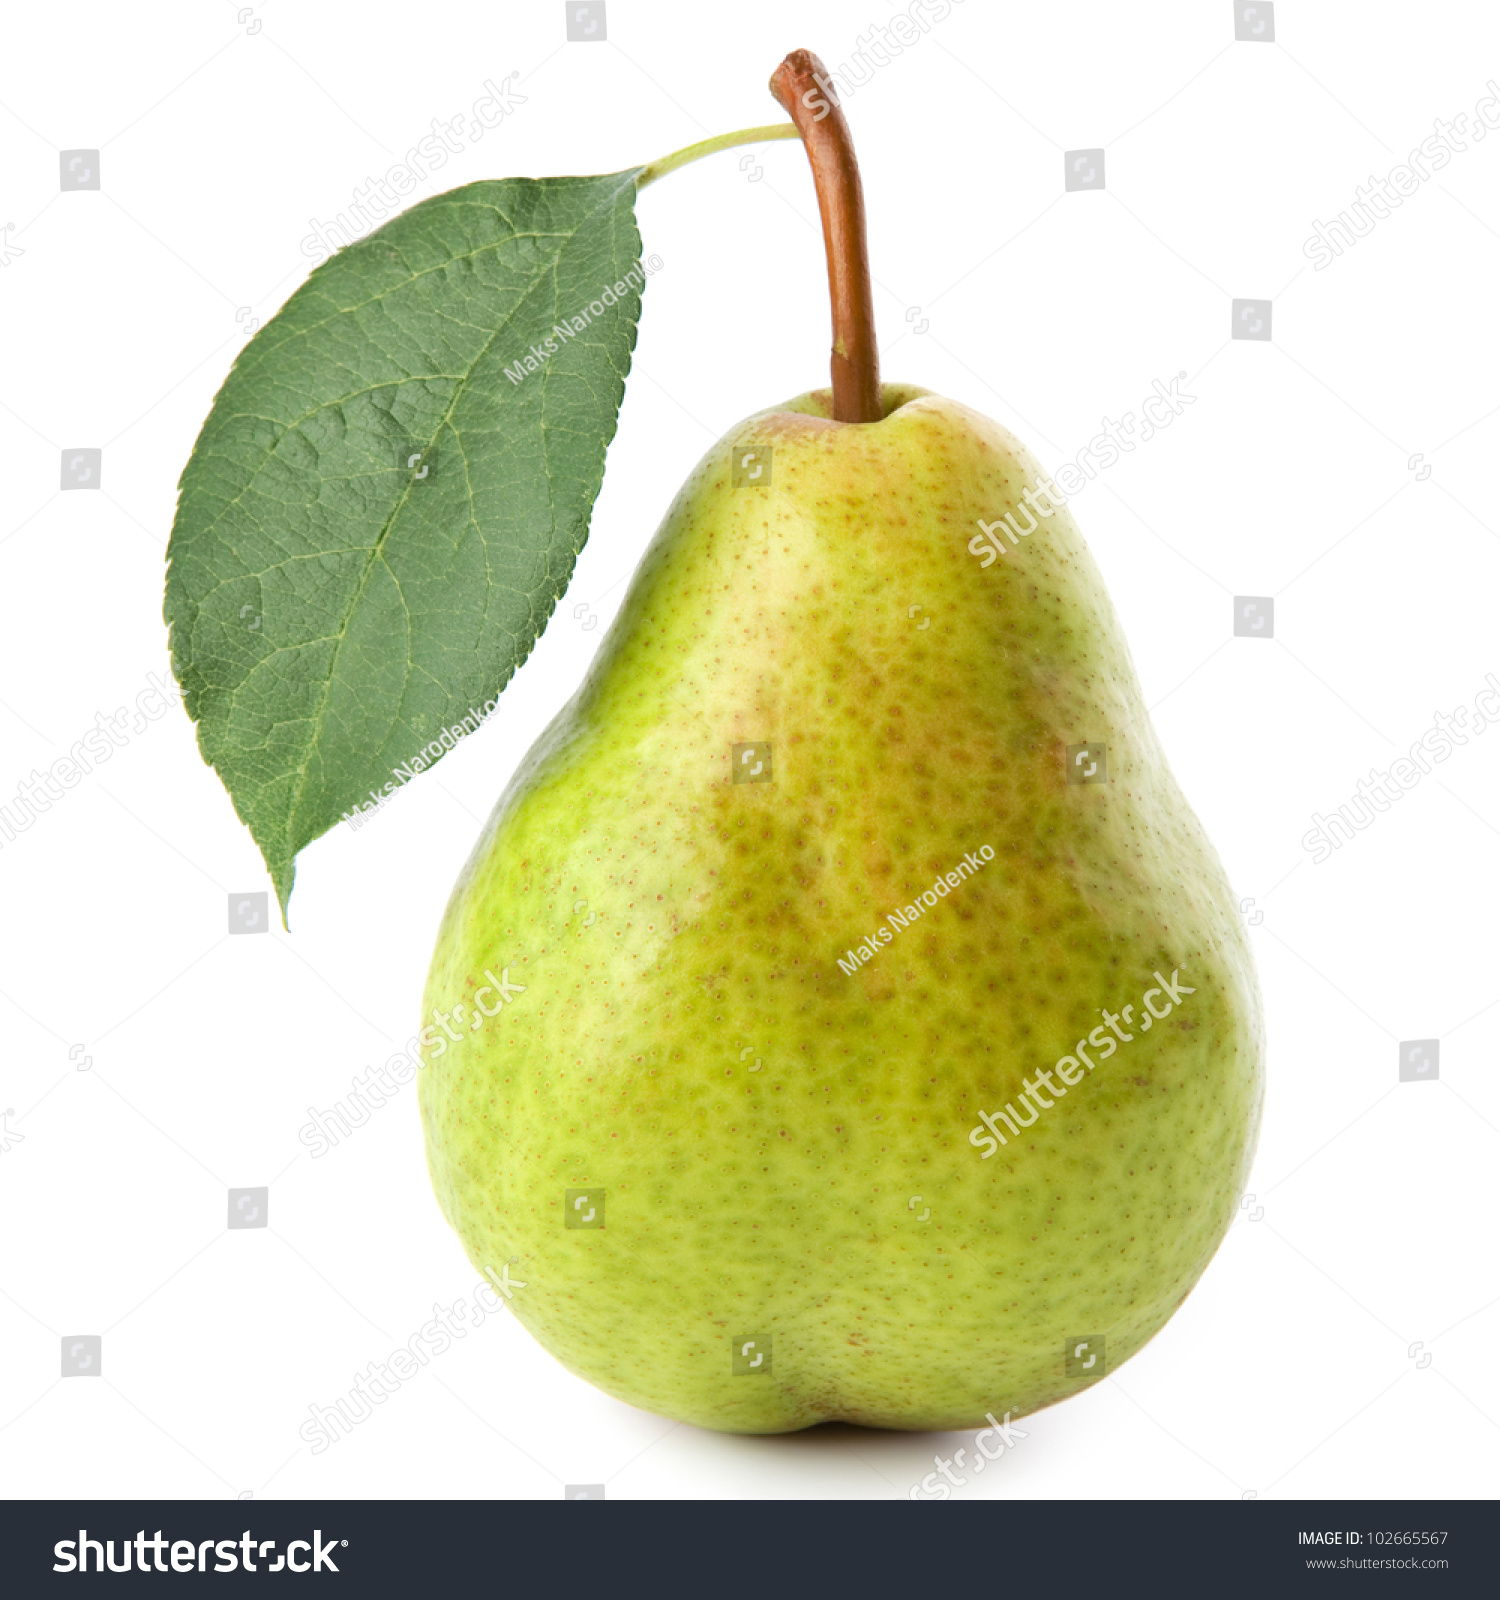 ripe pears isolated on white background #102665567